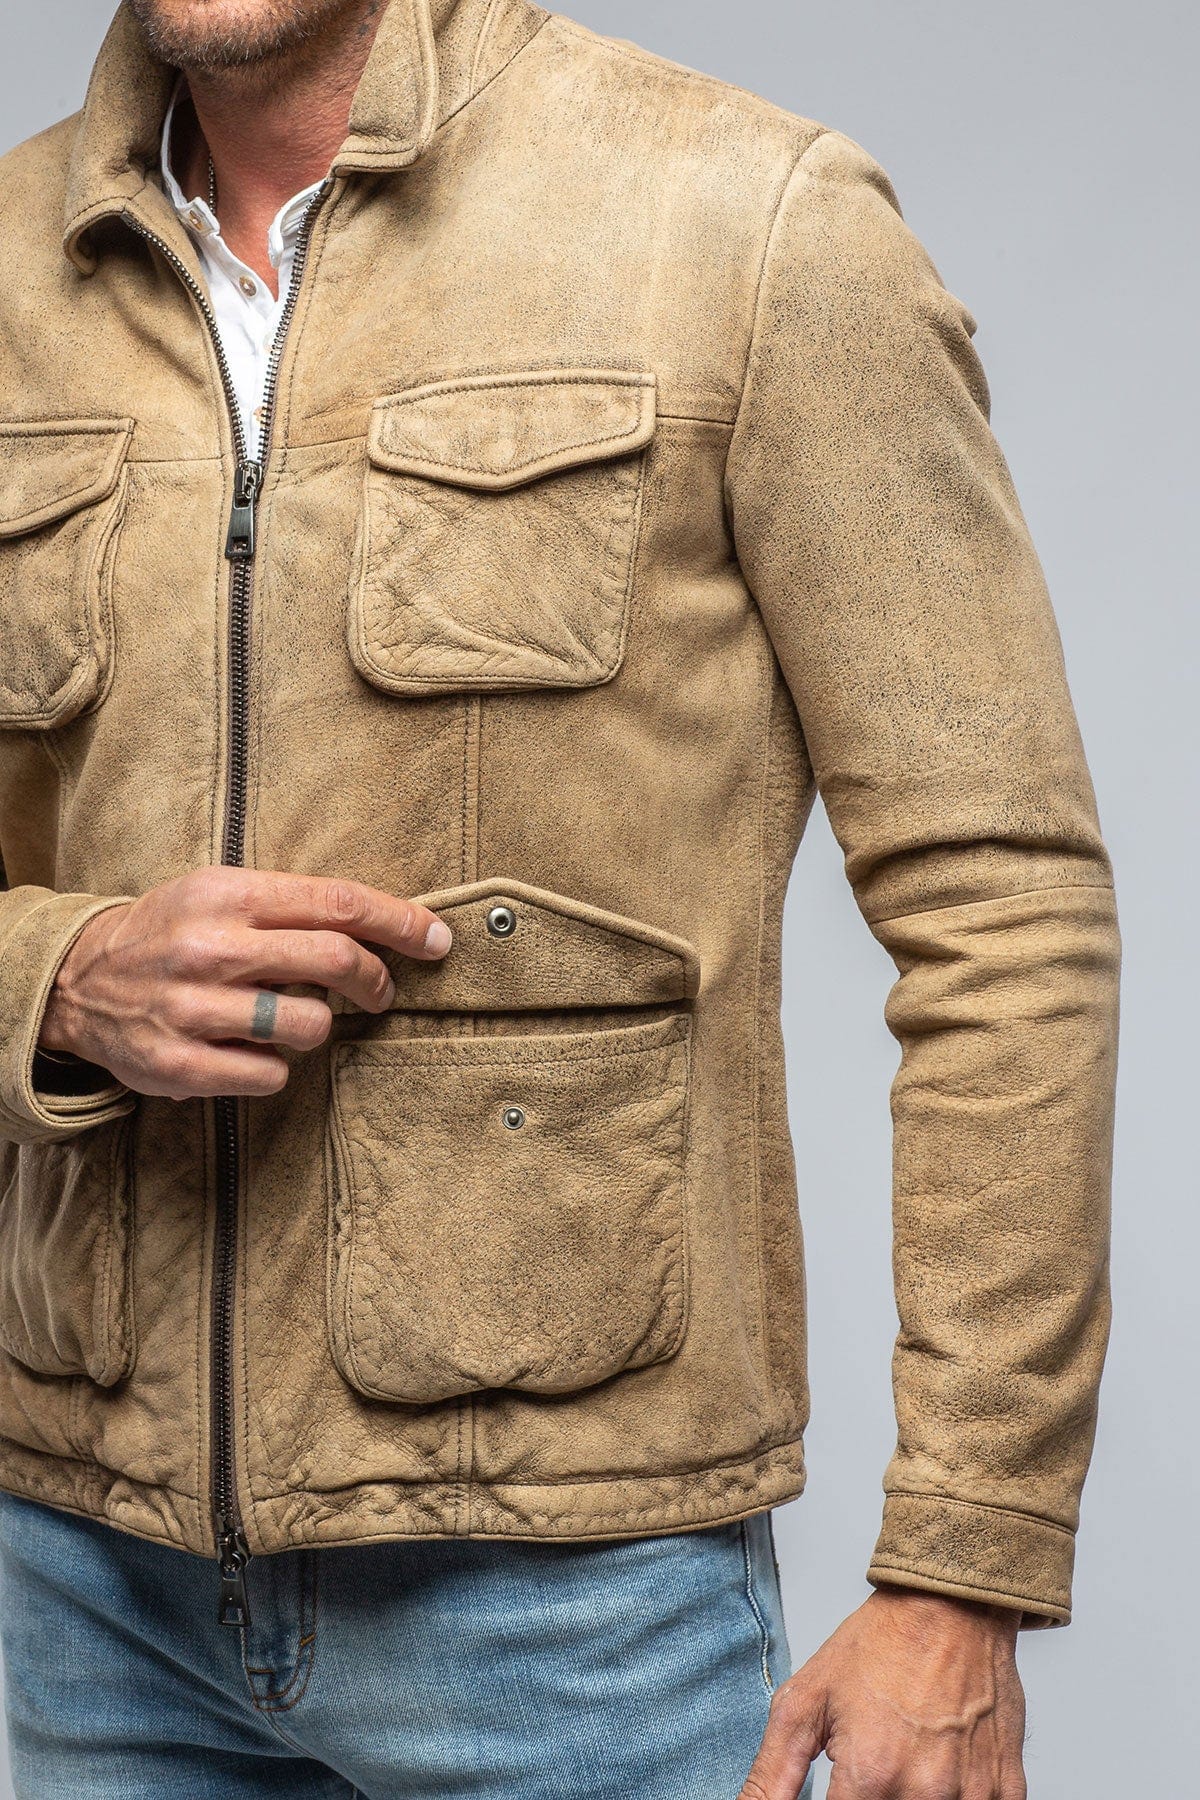 Dino Suede Jacket In Taupe - AXEL'S